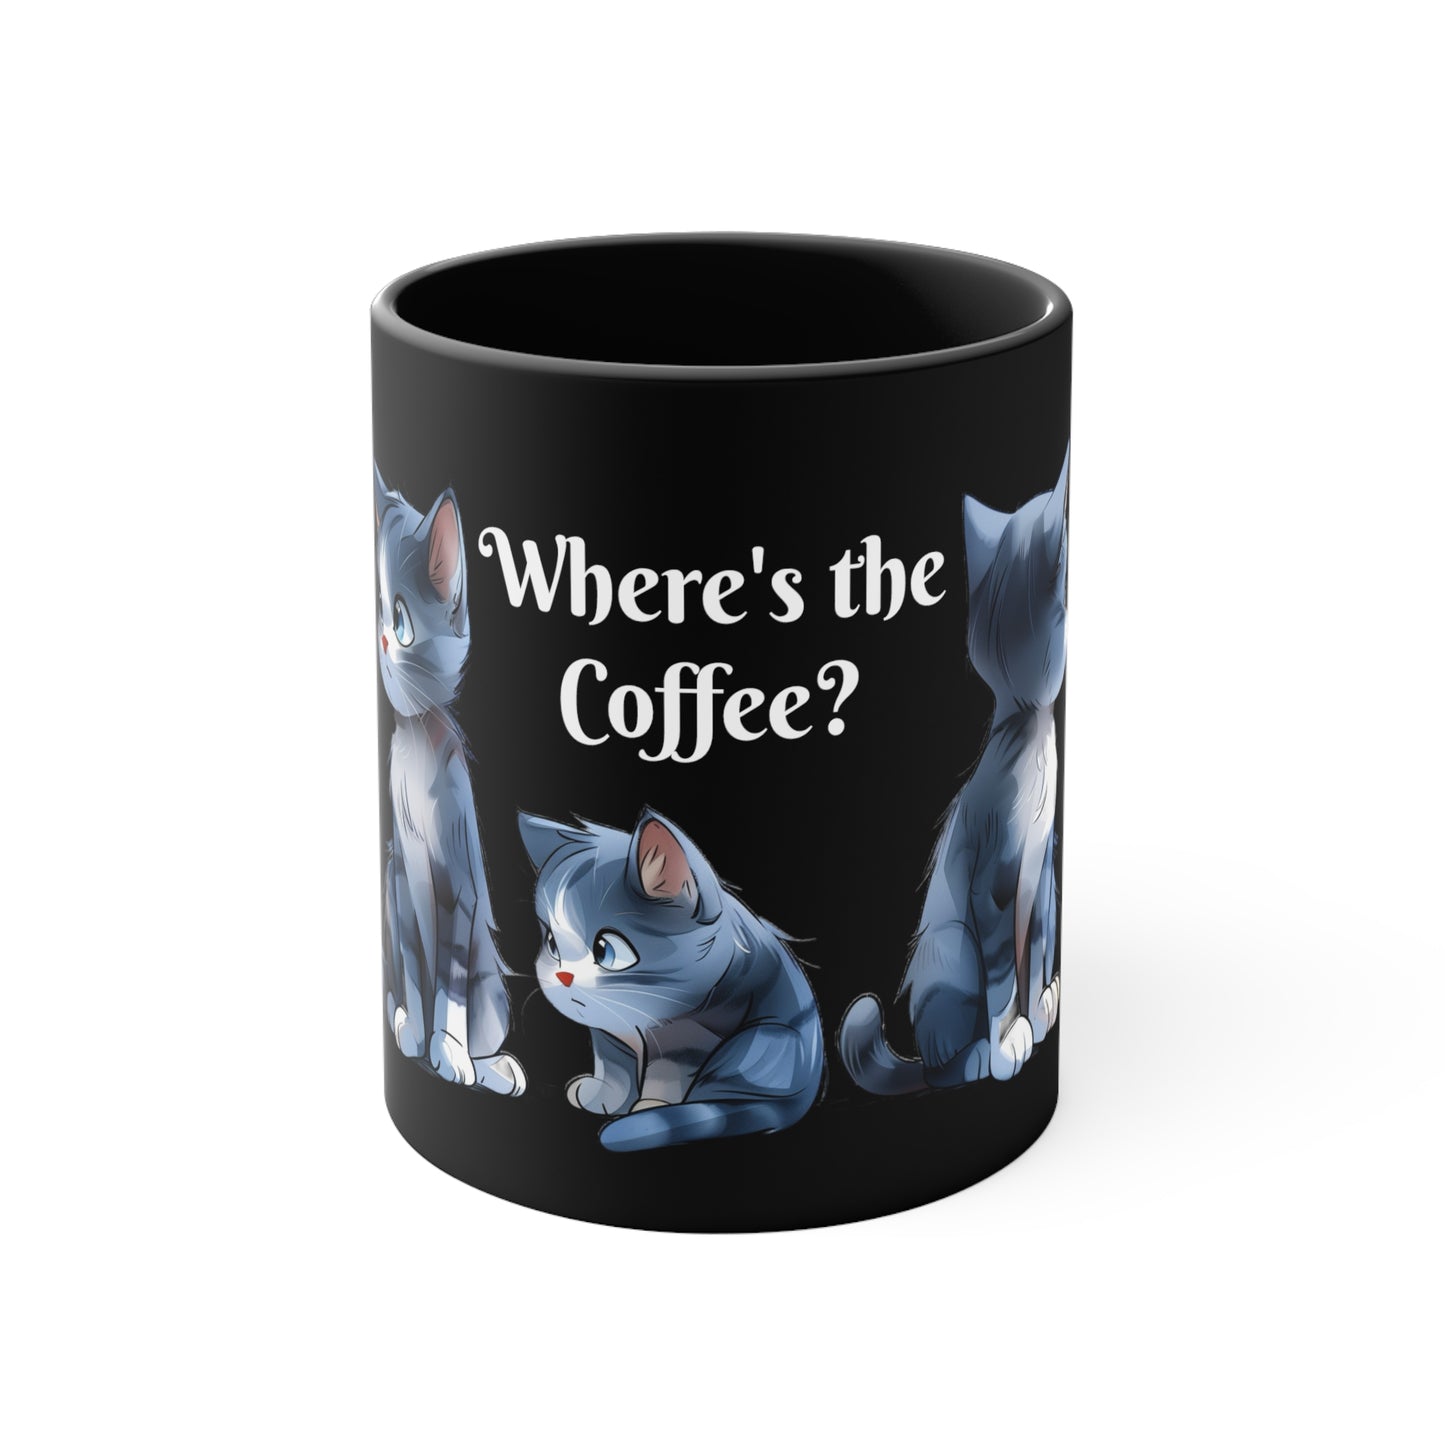 Where’s the Coffee? In Black